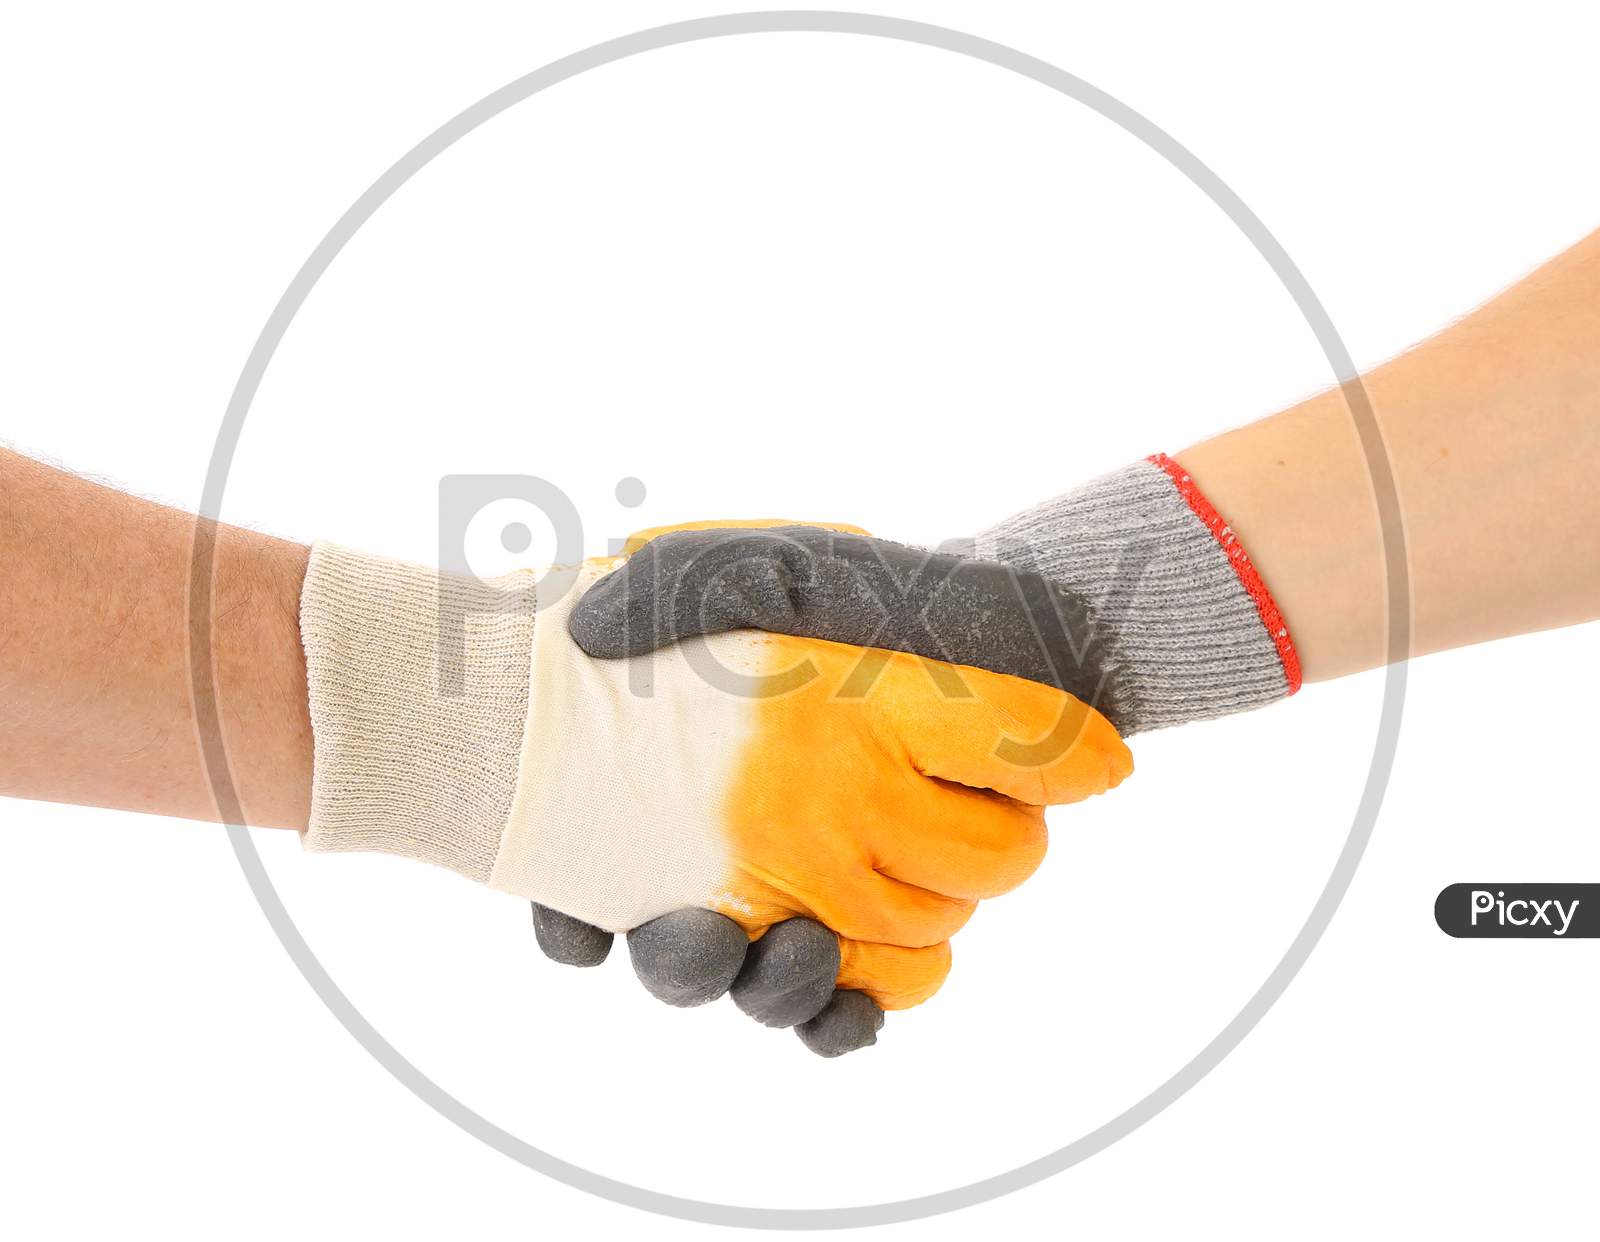 Two Hands In Gloves Of Hand Shake. Isolated On A White Background